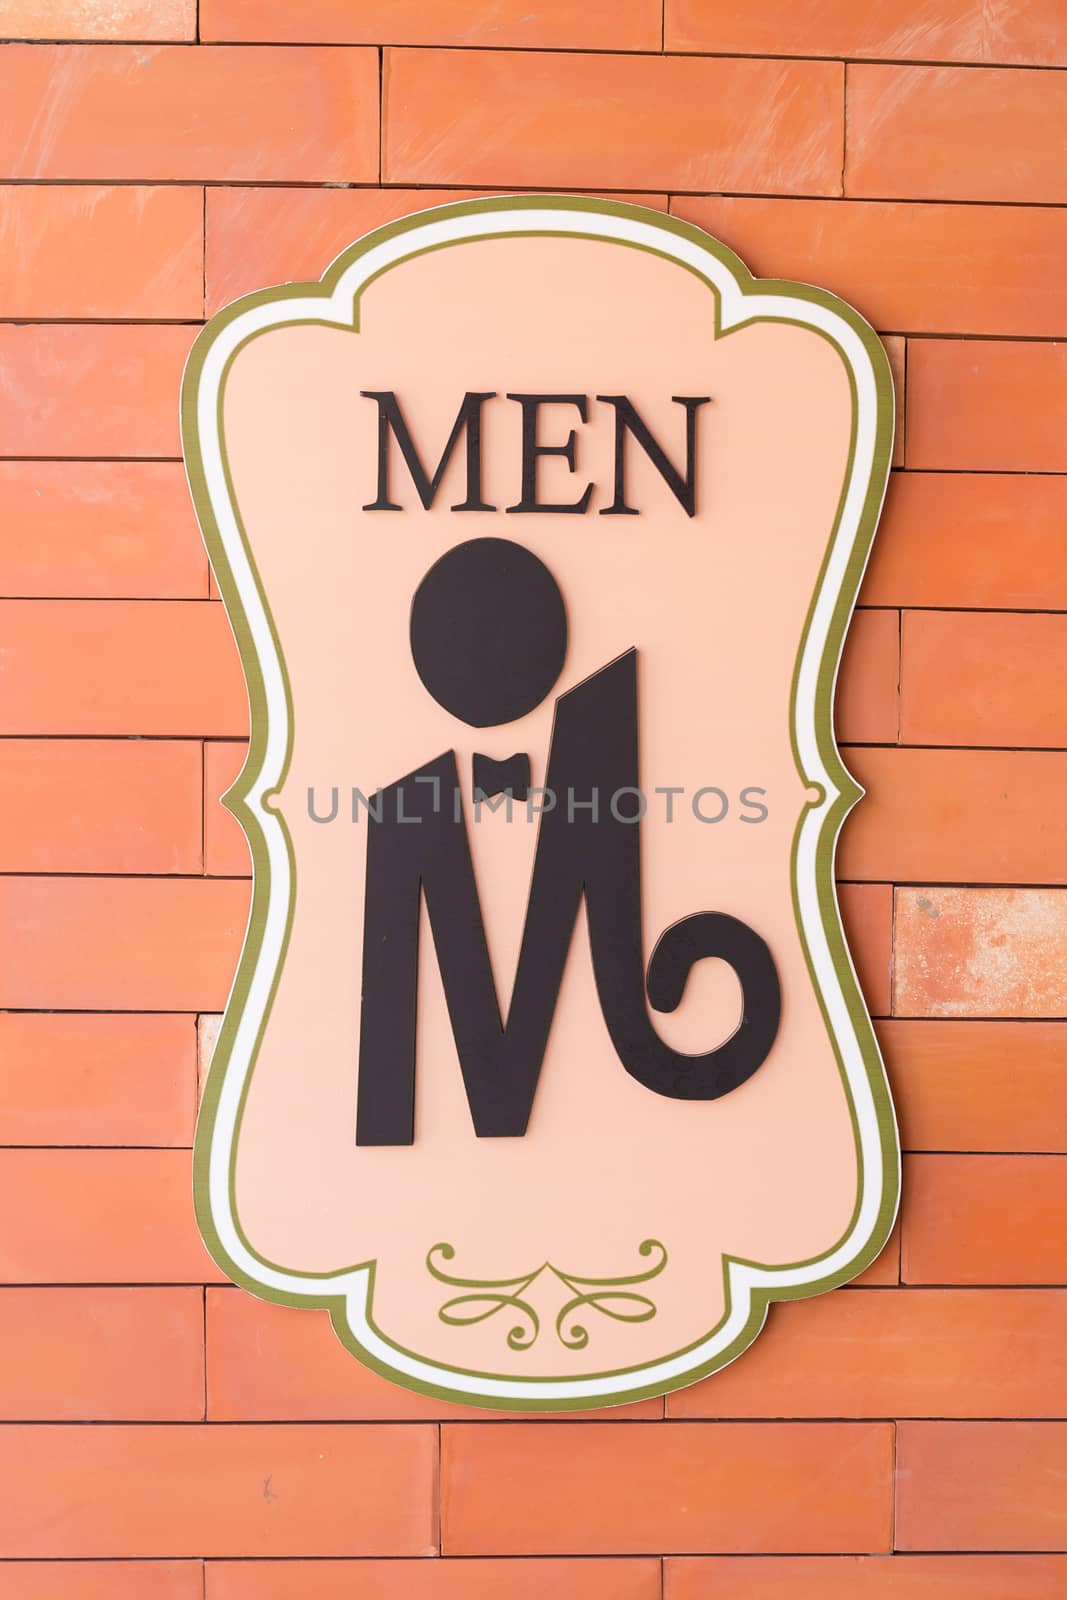 Modern sign on the brick wall of toilet. Text "men"